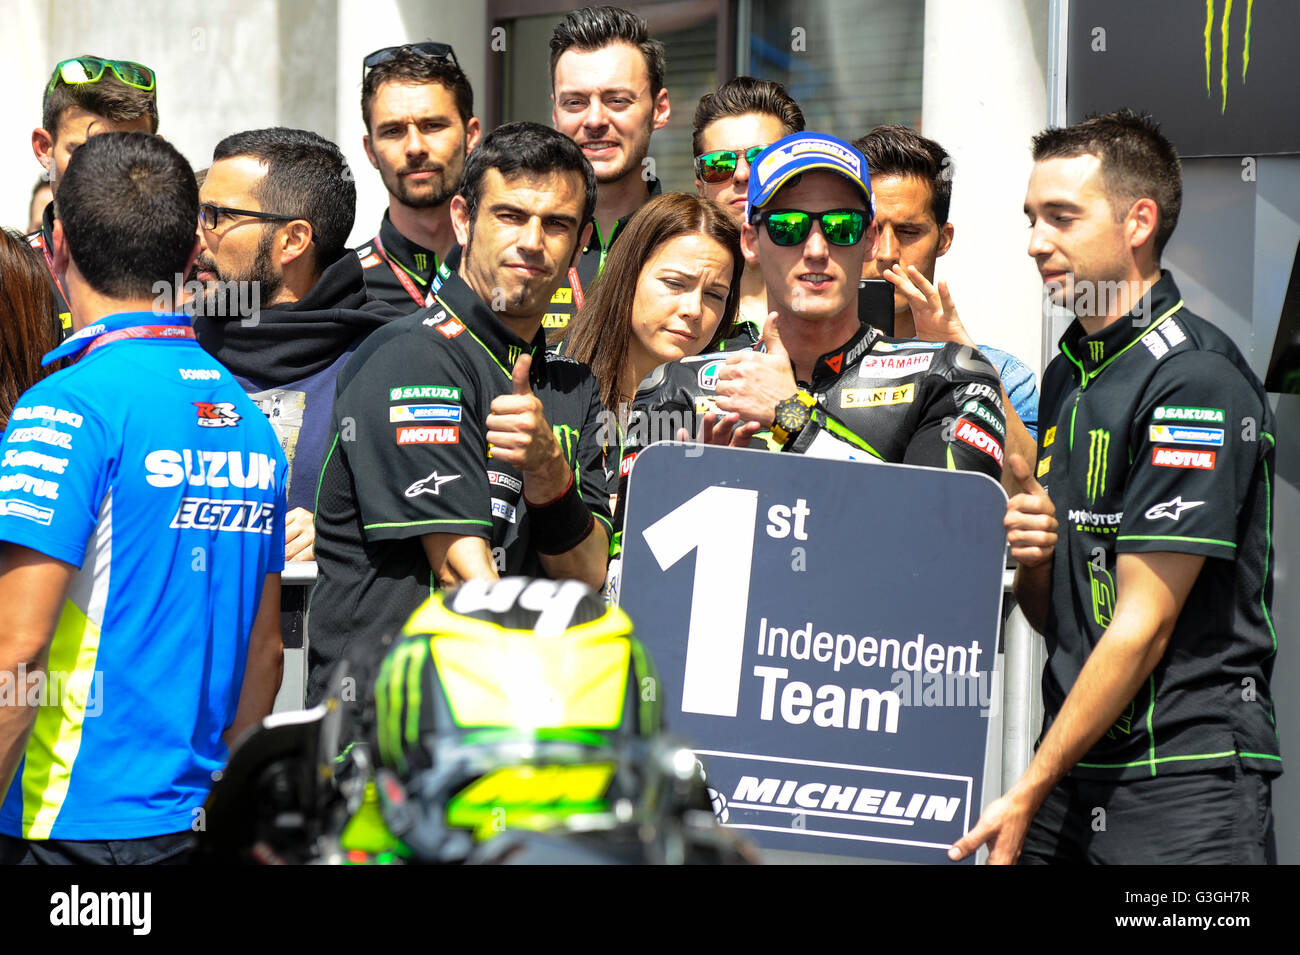 Le mans, France. 08th May, 2016. 08.05.2016. Le Mans, France. MotoGP race day.Pol Espargaro (Monster Yamaha Tech3). © Gaetano Piazzolla/Pacific Press/Alamy Live News Stock Photo